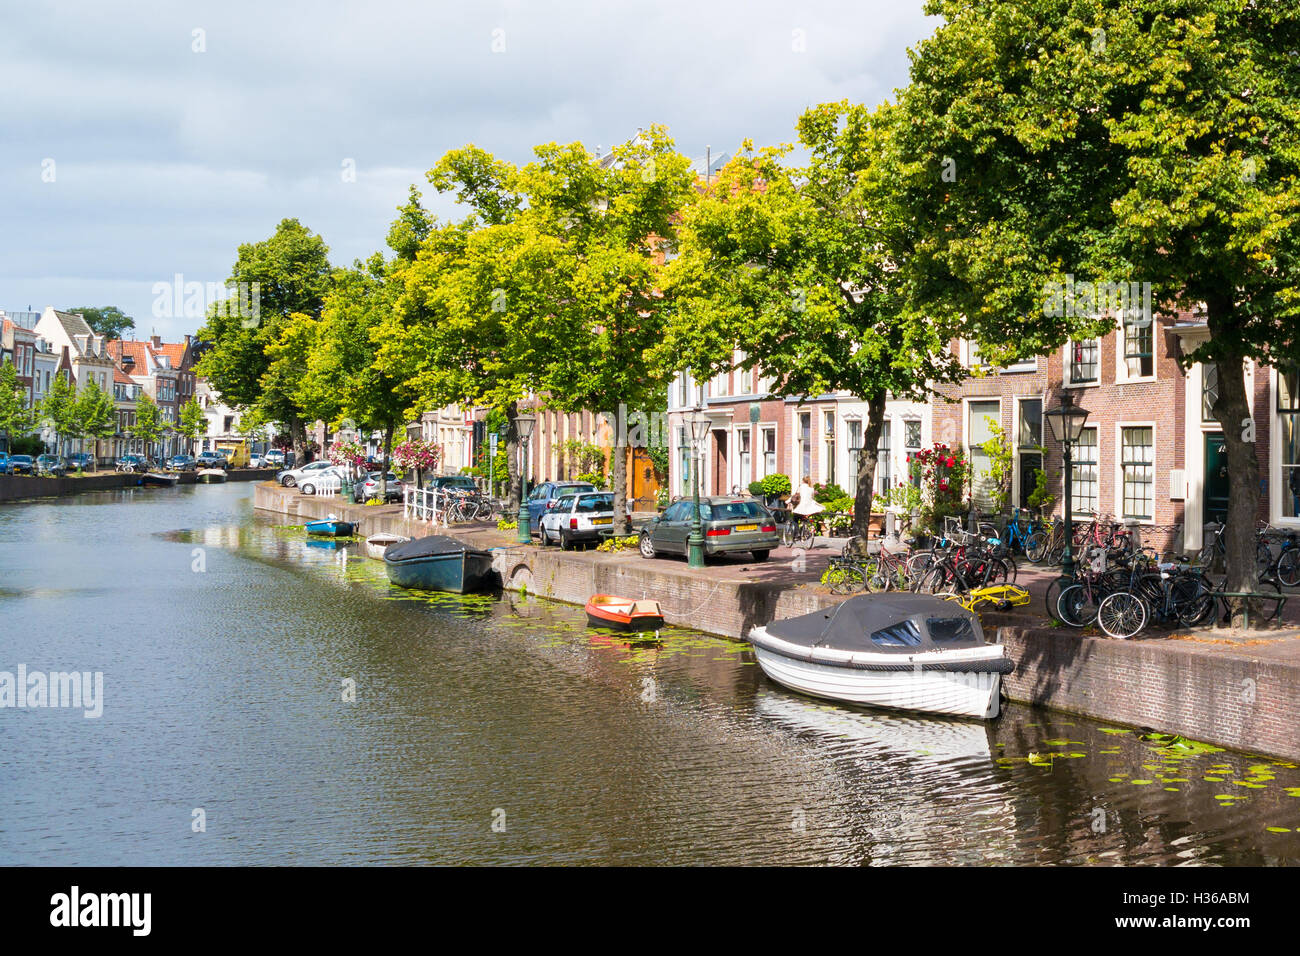 Rapenburg canal in old town of Leiden, South Holland, Netherlands Stock Photo